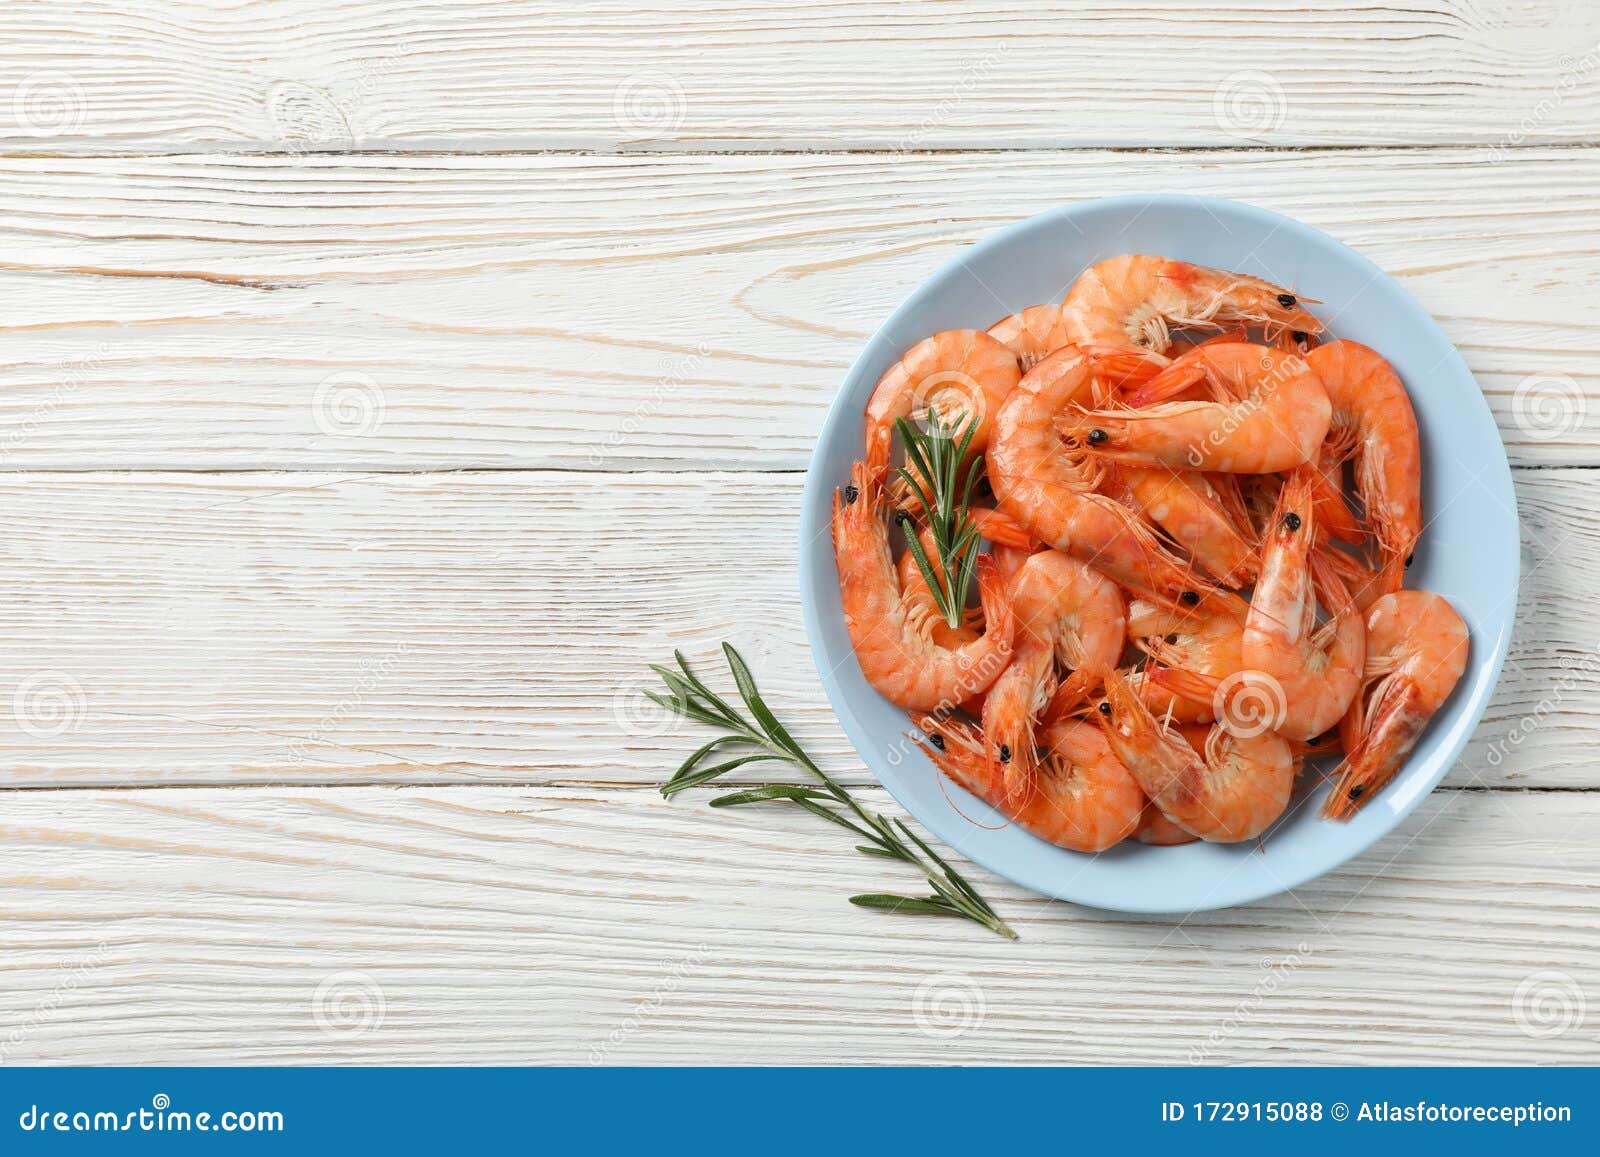 plate with shrimps on background, top view